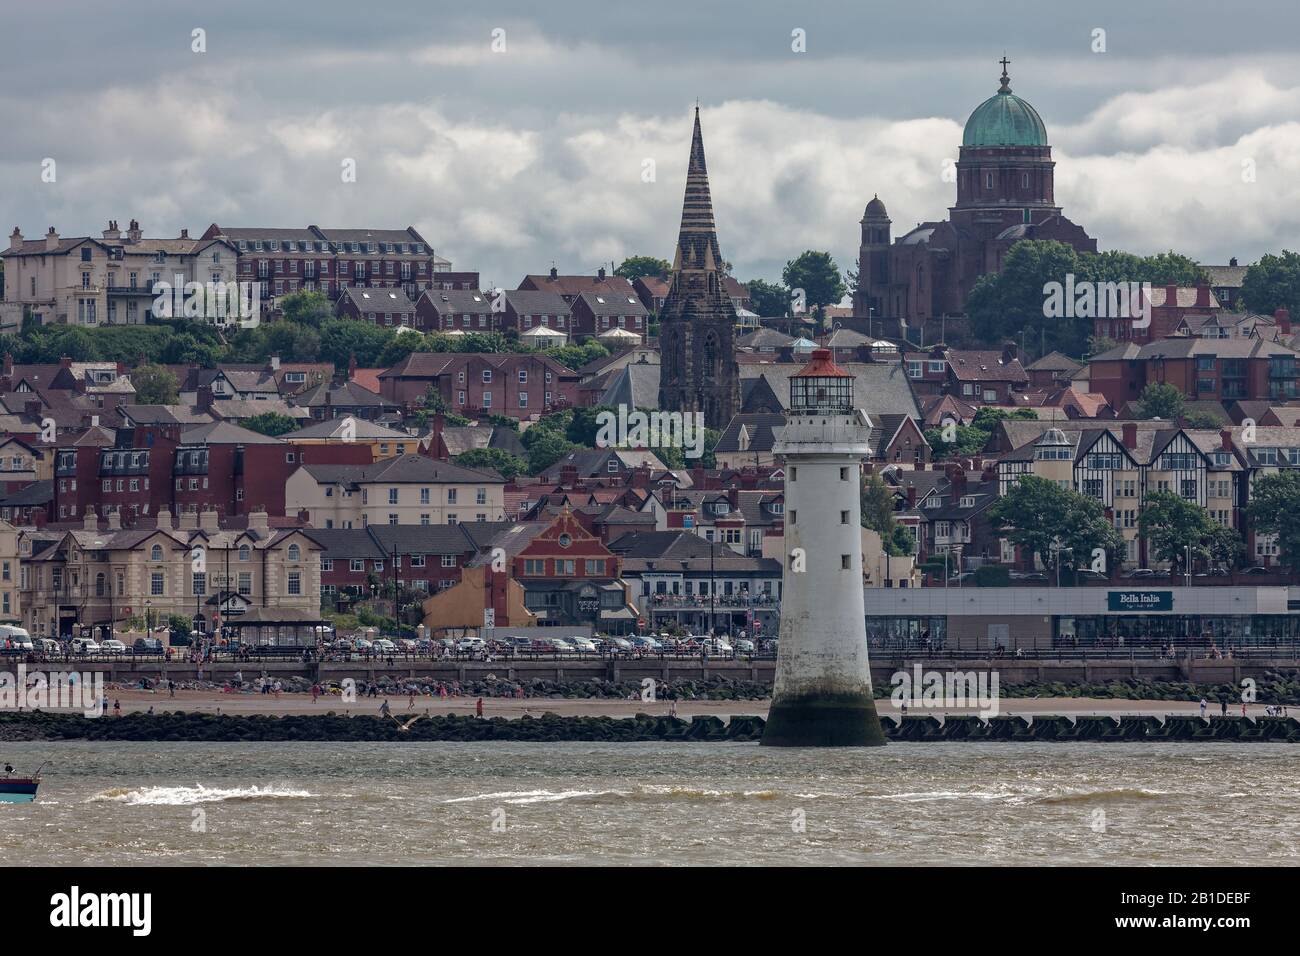 New Brighton viewed from offshore, including New Brighton Lighthouse, the Dome of Home catholic church and St James Church Stock Photo